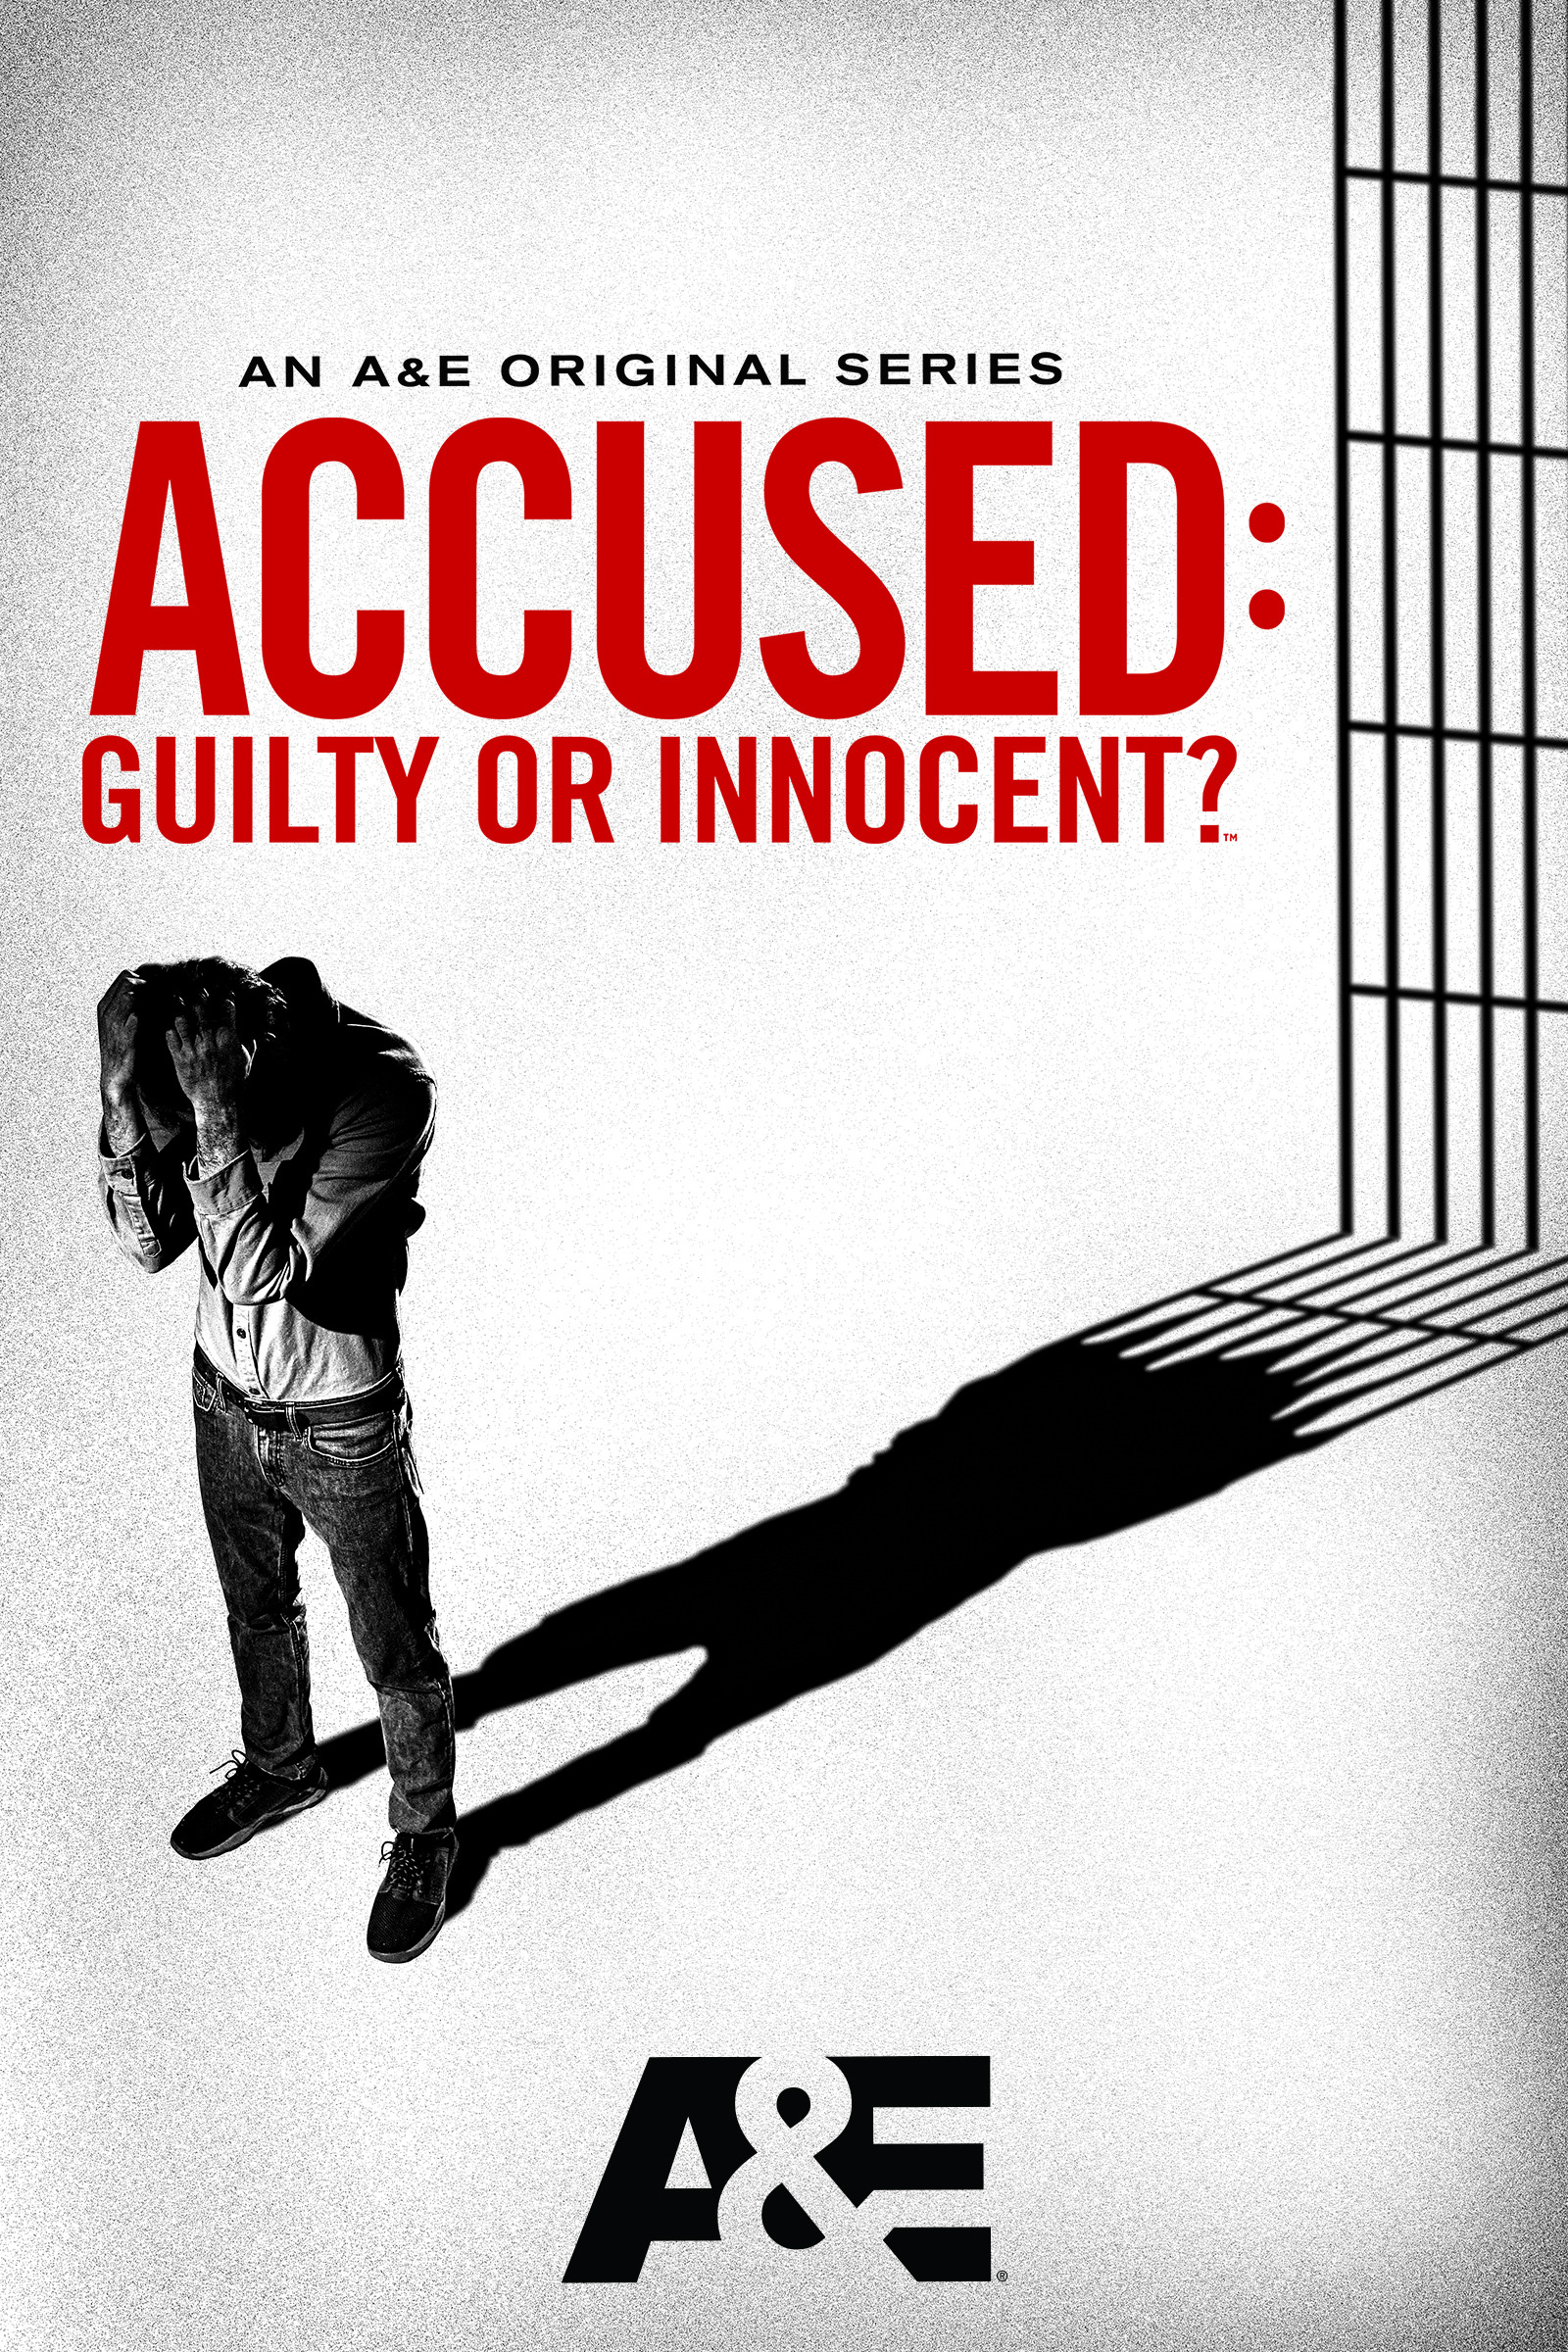 Mega Sized TV Poster Image for Accused: Guilty or Innocent? (#2 of 2)